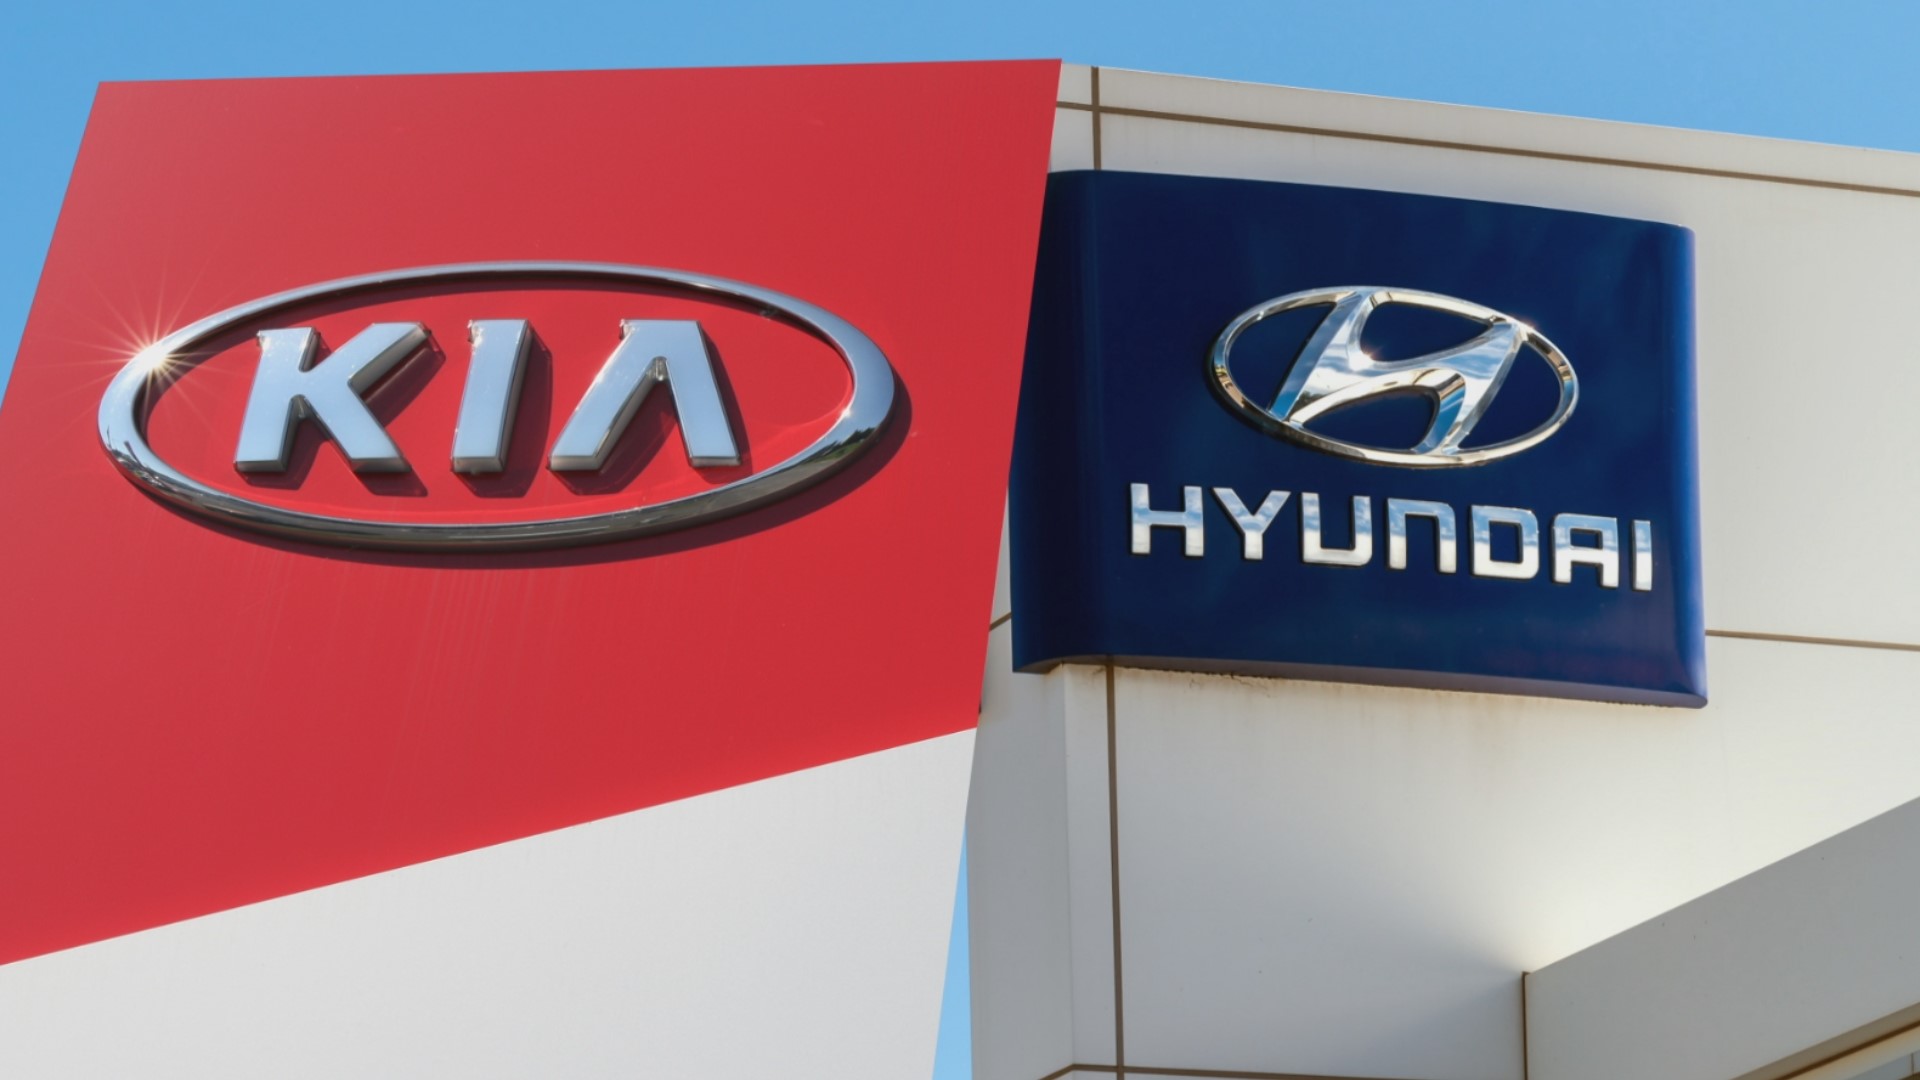 If Hyundai and Kia don’t do something to curb the epidemic of thefts involving their vehicles by Sept. 19, St. Louis will be filing a lawsuit against them.